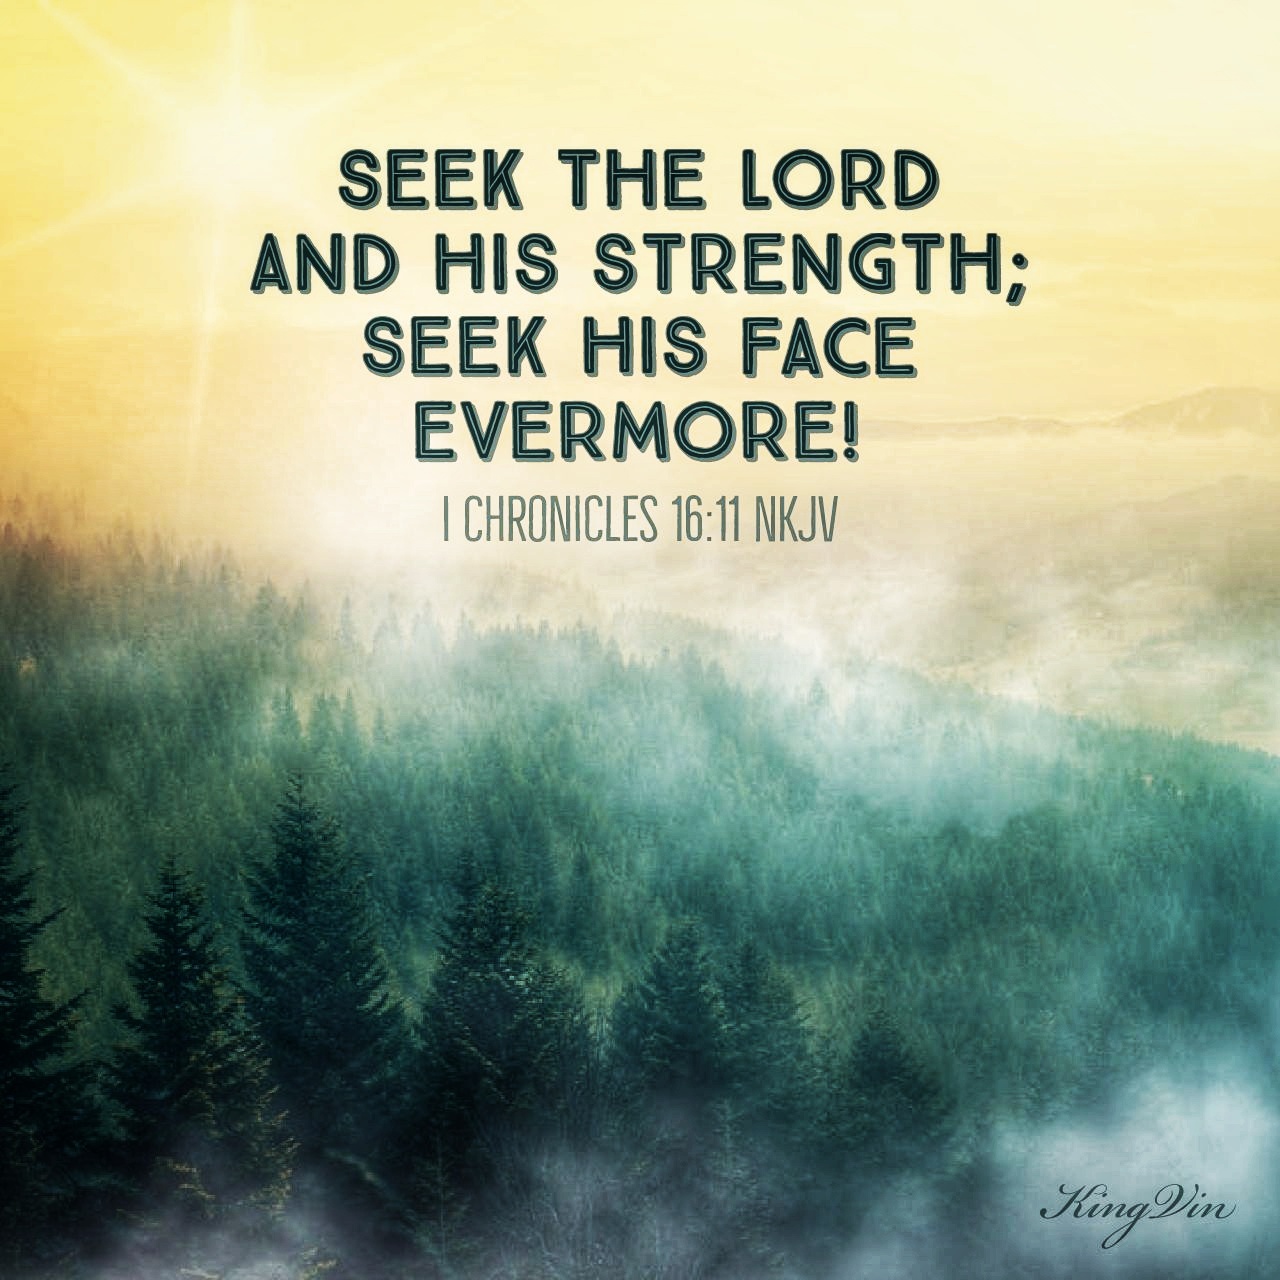 Seek the Lord and His strength; Seek His face evermore! I Chronicles 16:11 NKJV